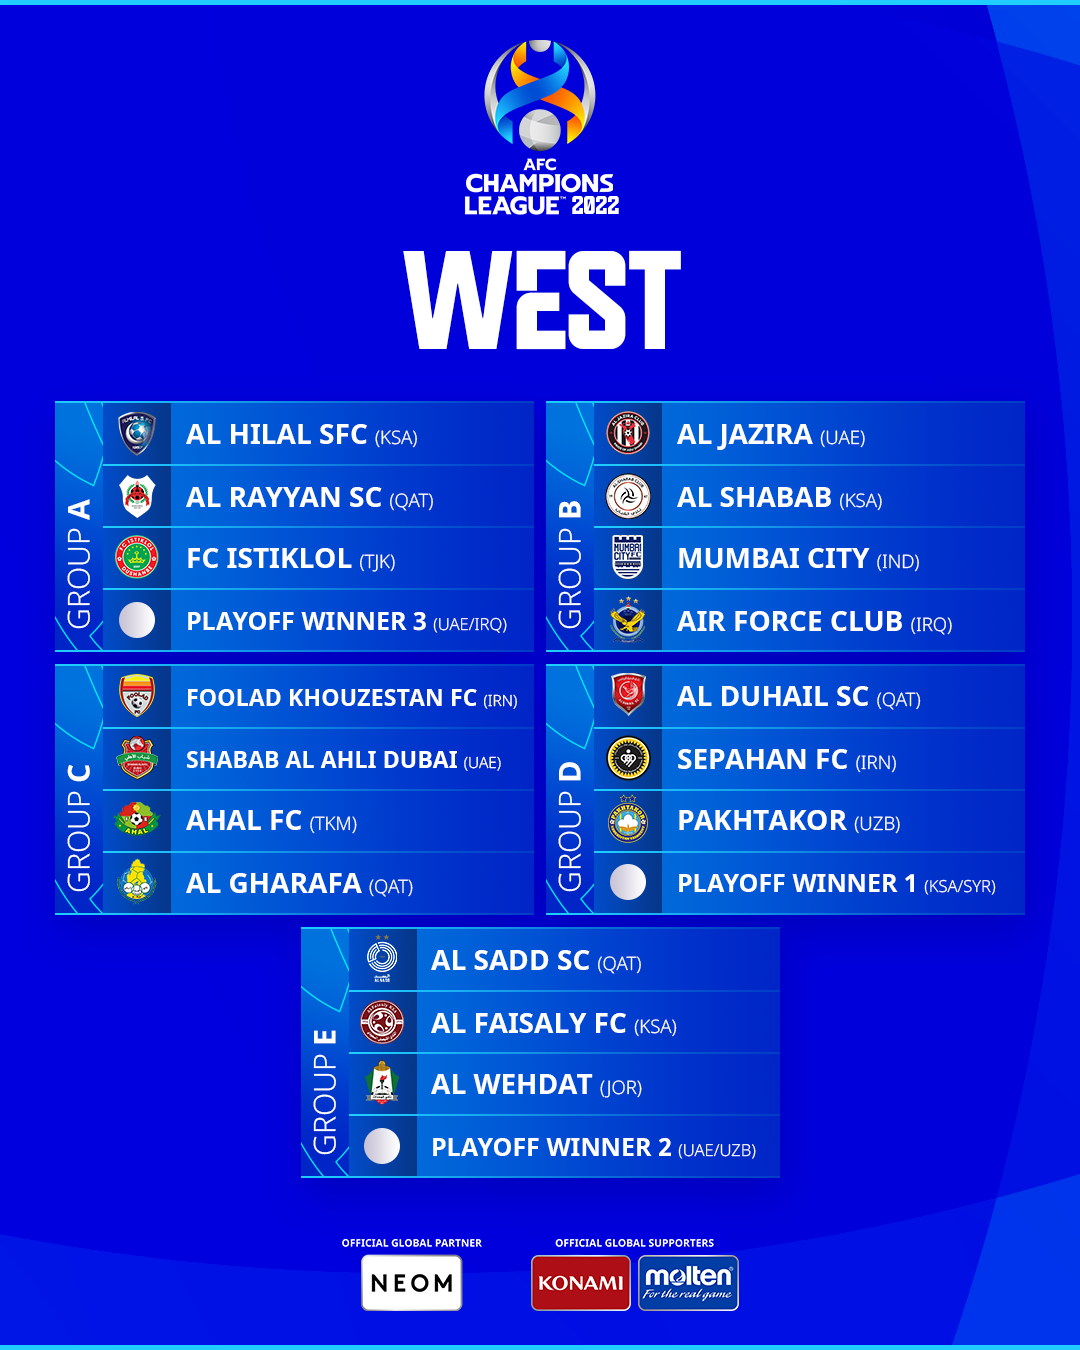 Teams learn 2022 AFC Champions League opponentsMeet the 2022 AFC Champions League DebutantsMeet the 2022 AFC Cup DebutantsGroup A: Players to WatchGroup B: Players to WatchIndia 2022: Know Your Group A TeamsIndia 2022: Know Your Group B TeamsIndia 2022: Know Your Group C Teams